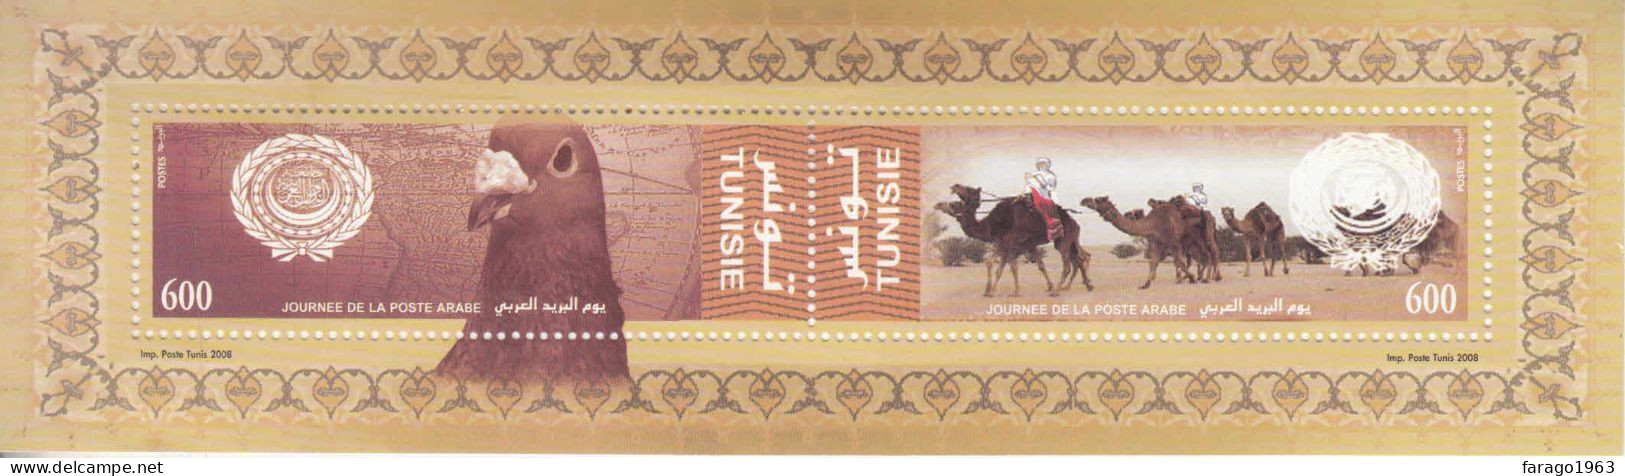 2008 Tunisia Arab Post Day Camels Pigeon JOINT ISSUE Souvenir Sheet MNH - Tunisia